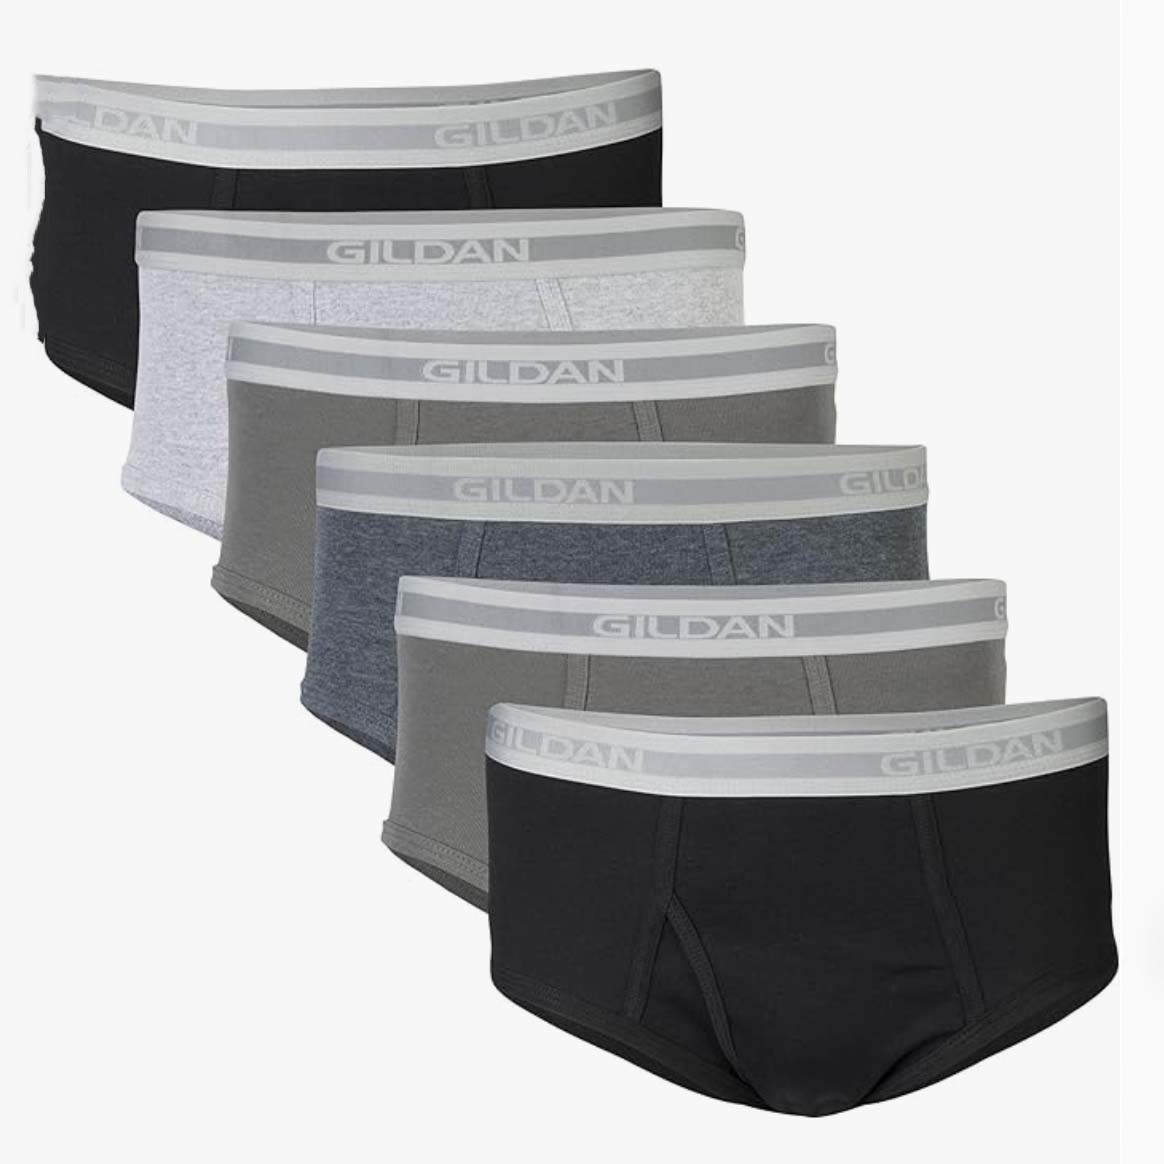 6 pairs of Gildan briefs in shades of grey and black